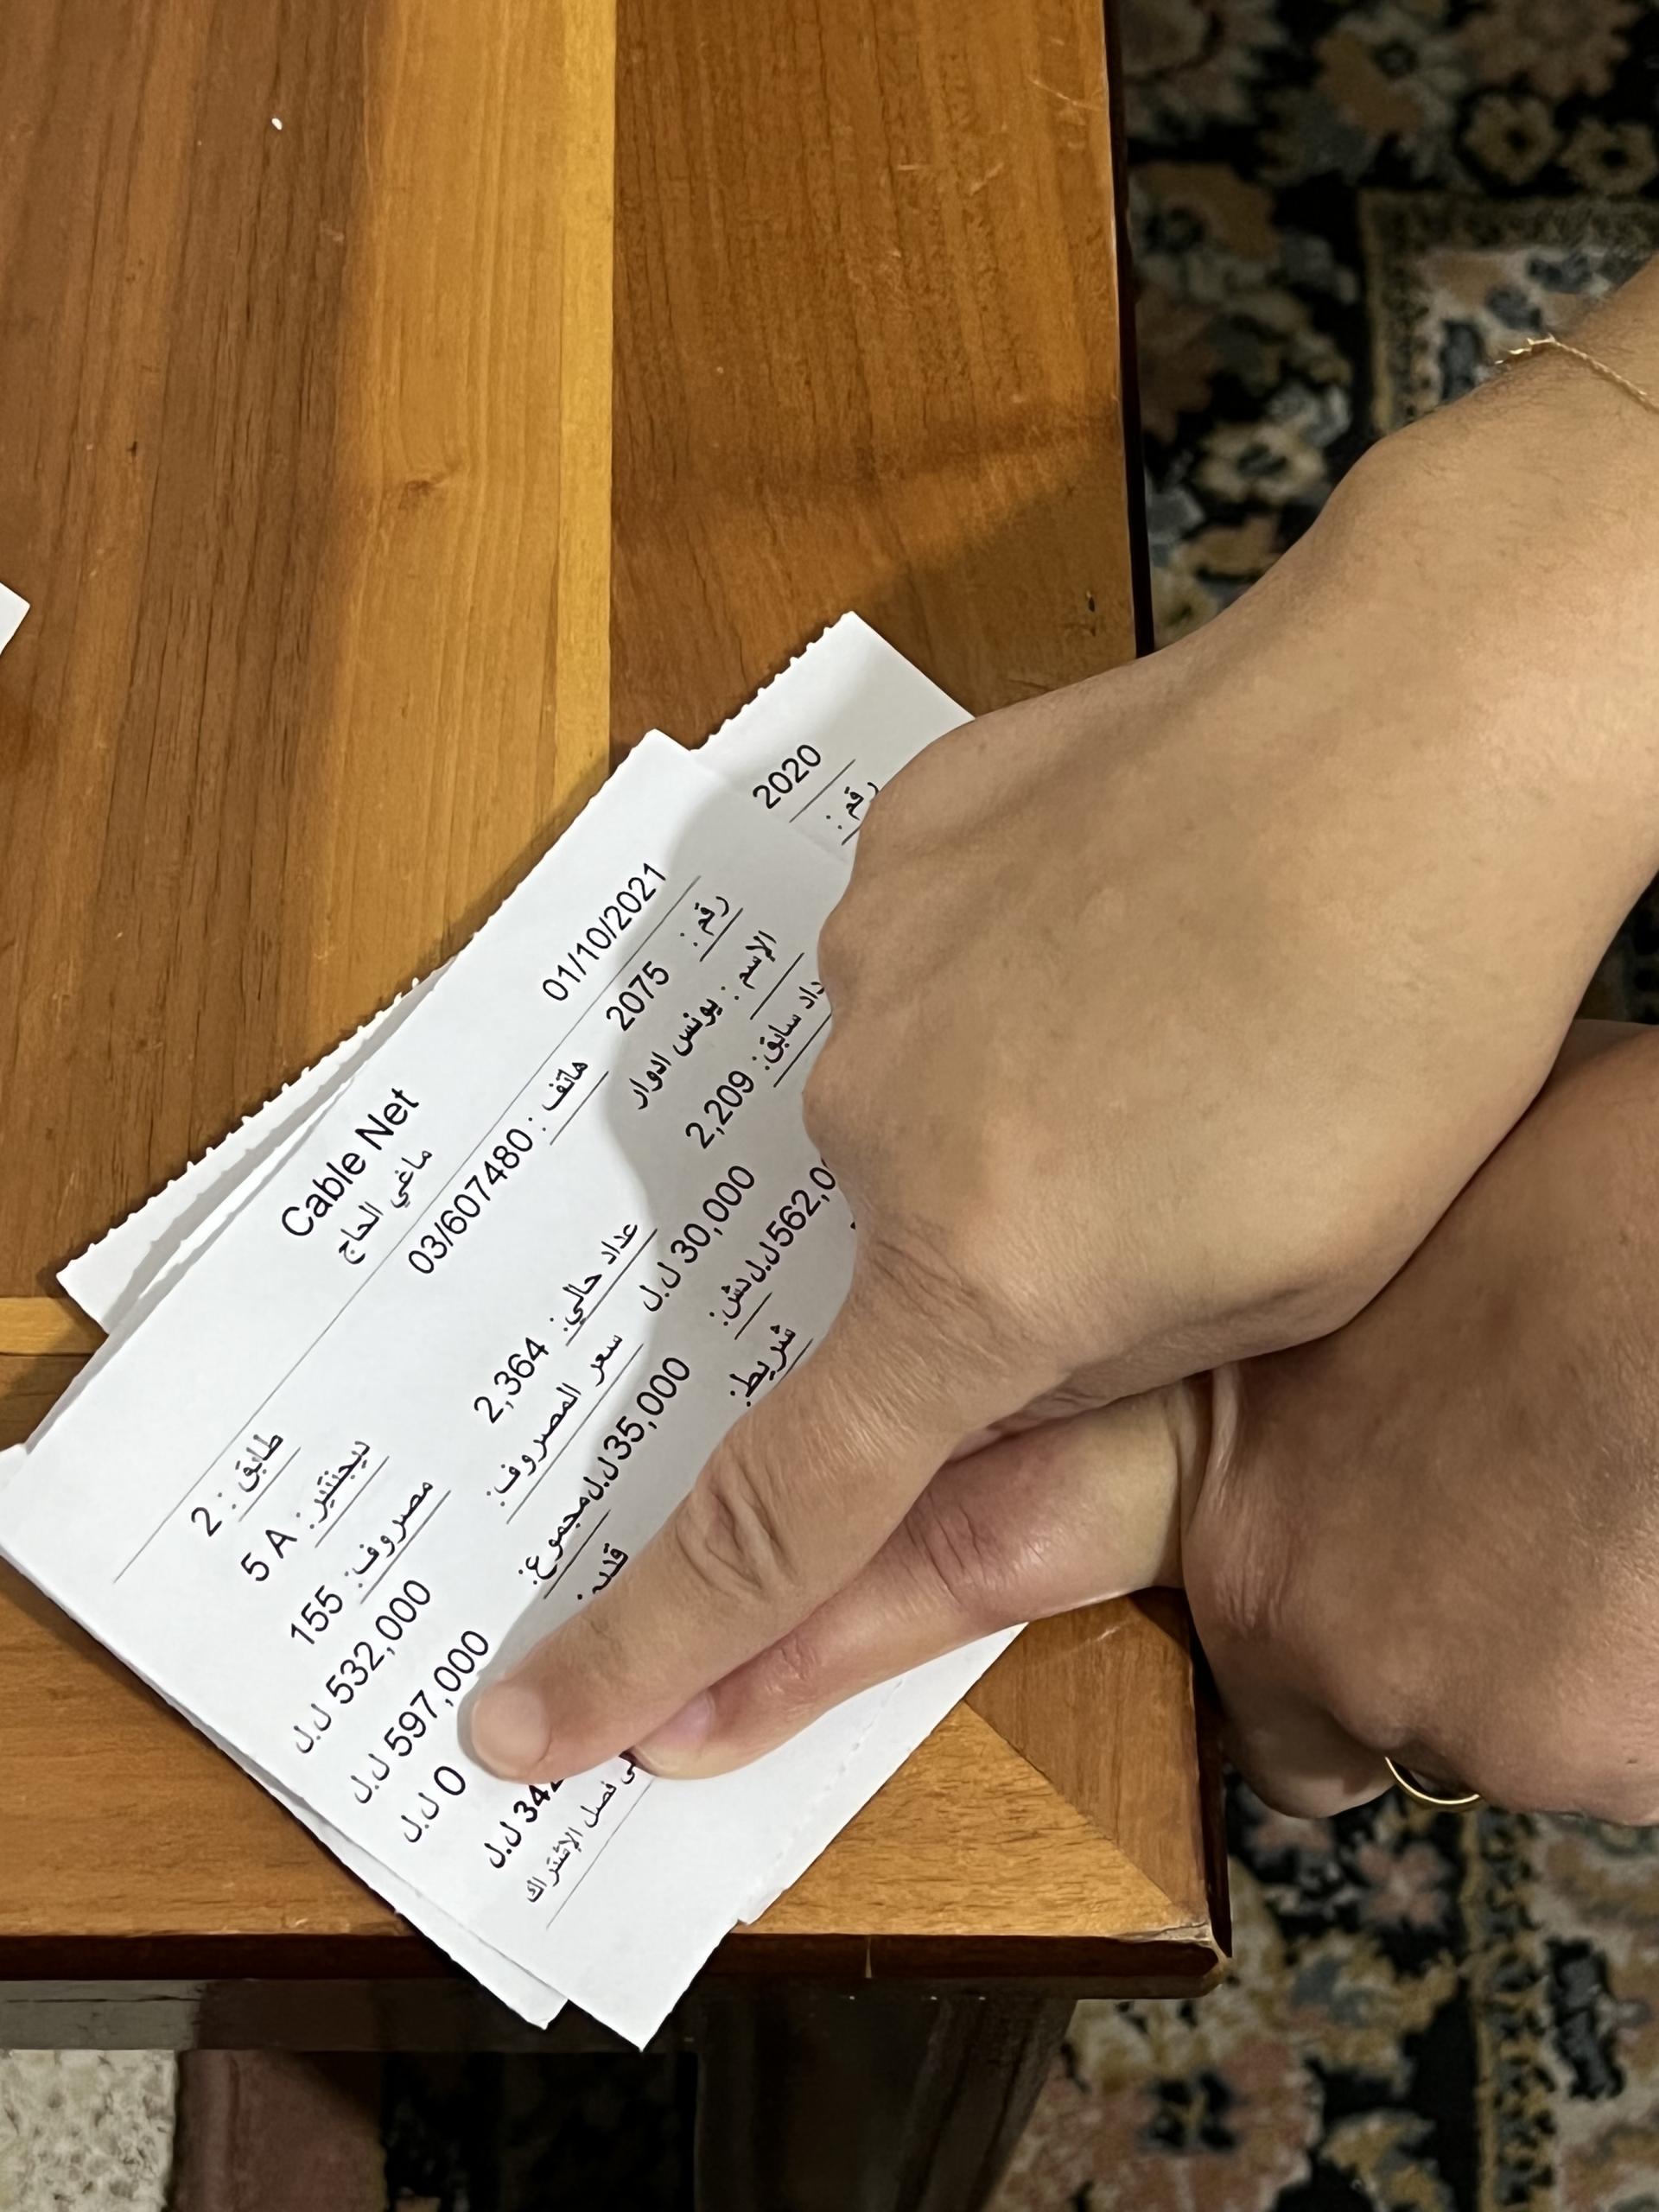 Beirut resident Diala Attieh Younes shows her generator bills. She paid about 600,000 lira last month. This is while she lost her job as a teacher at the beginning of the pandemic.